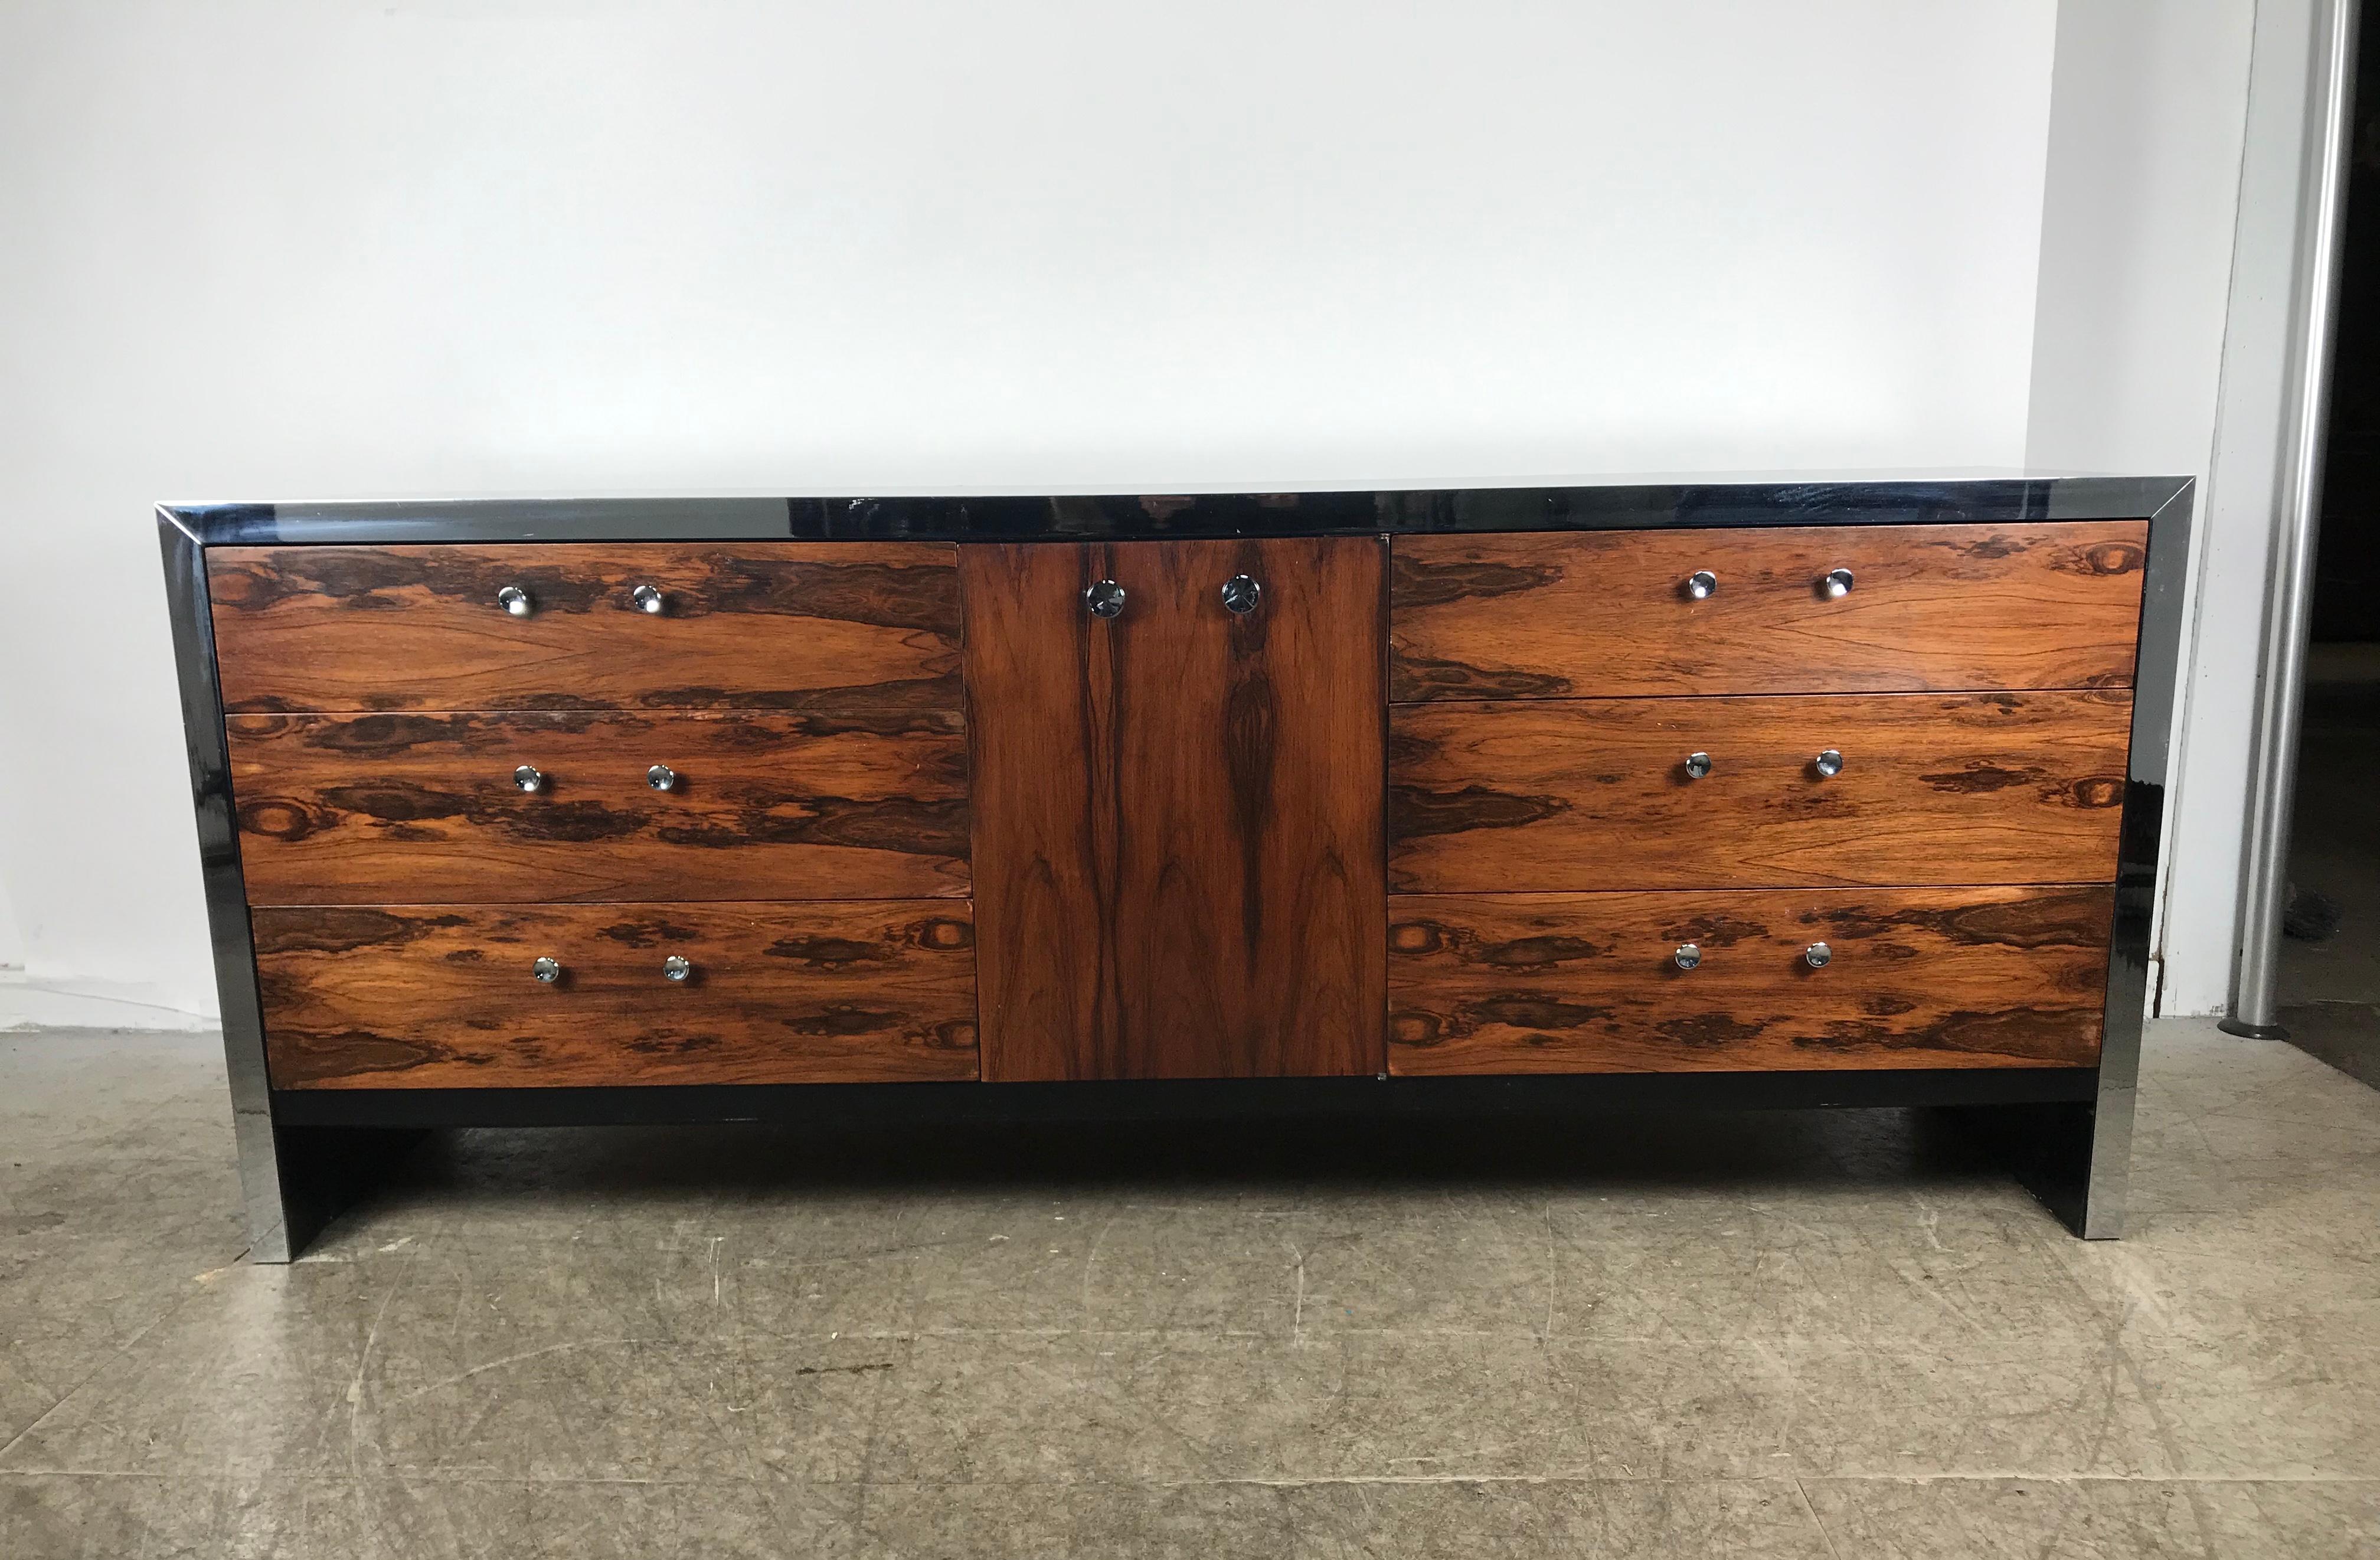 Stunning modernist rosewood dresser by Milo Baughman for John Stewart, amazing figured rosewood and black lacquer with chrome trim front, nine generous size dovetail jointed drawers, hand delivery avail to New York City or anywhere en route from